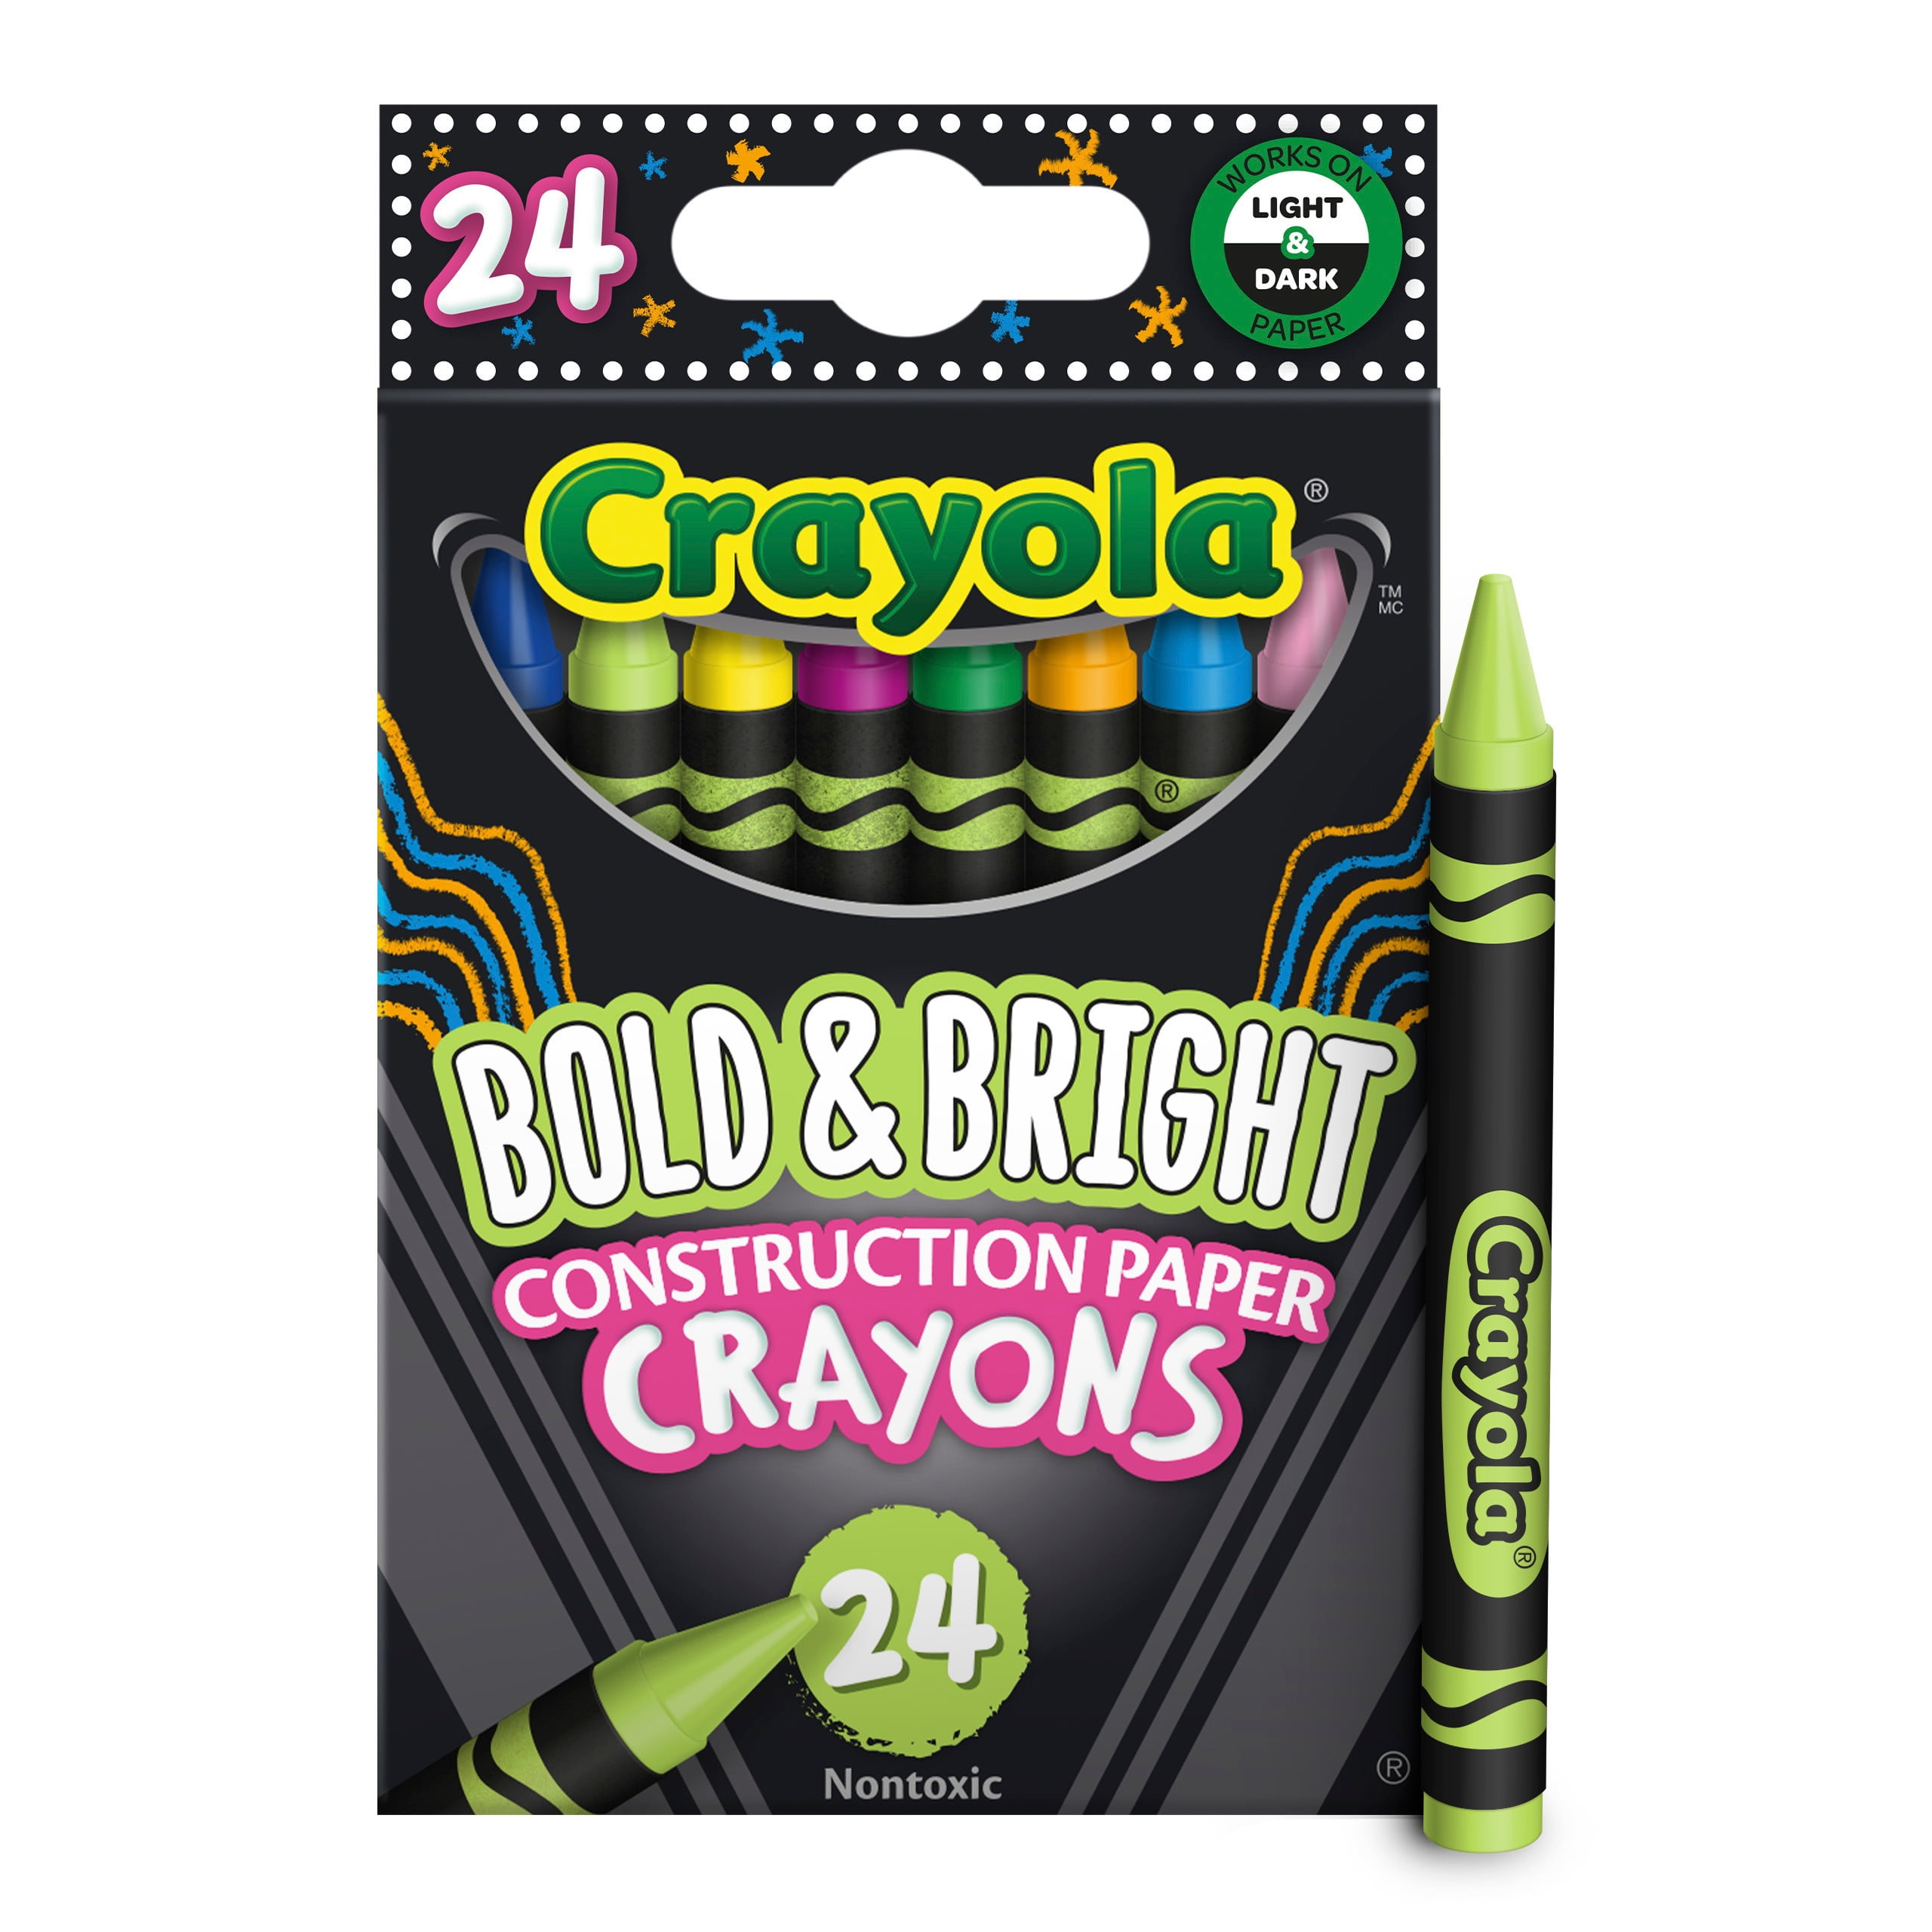 Personalized 4 Pack Crayons - Green Box - Crayons